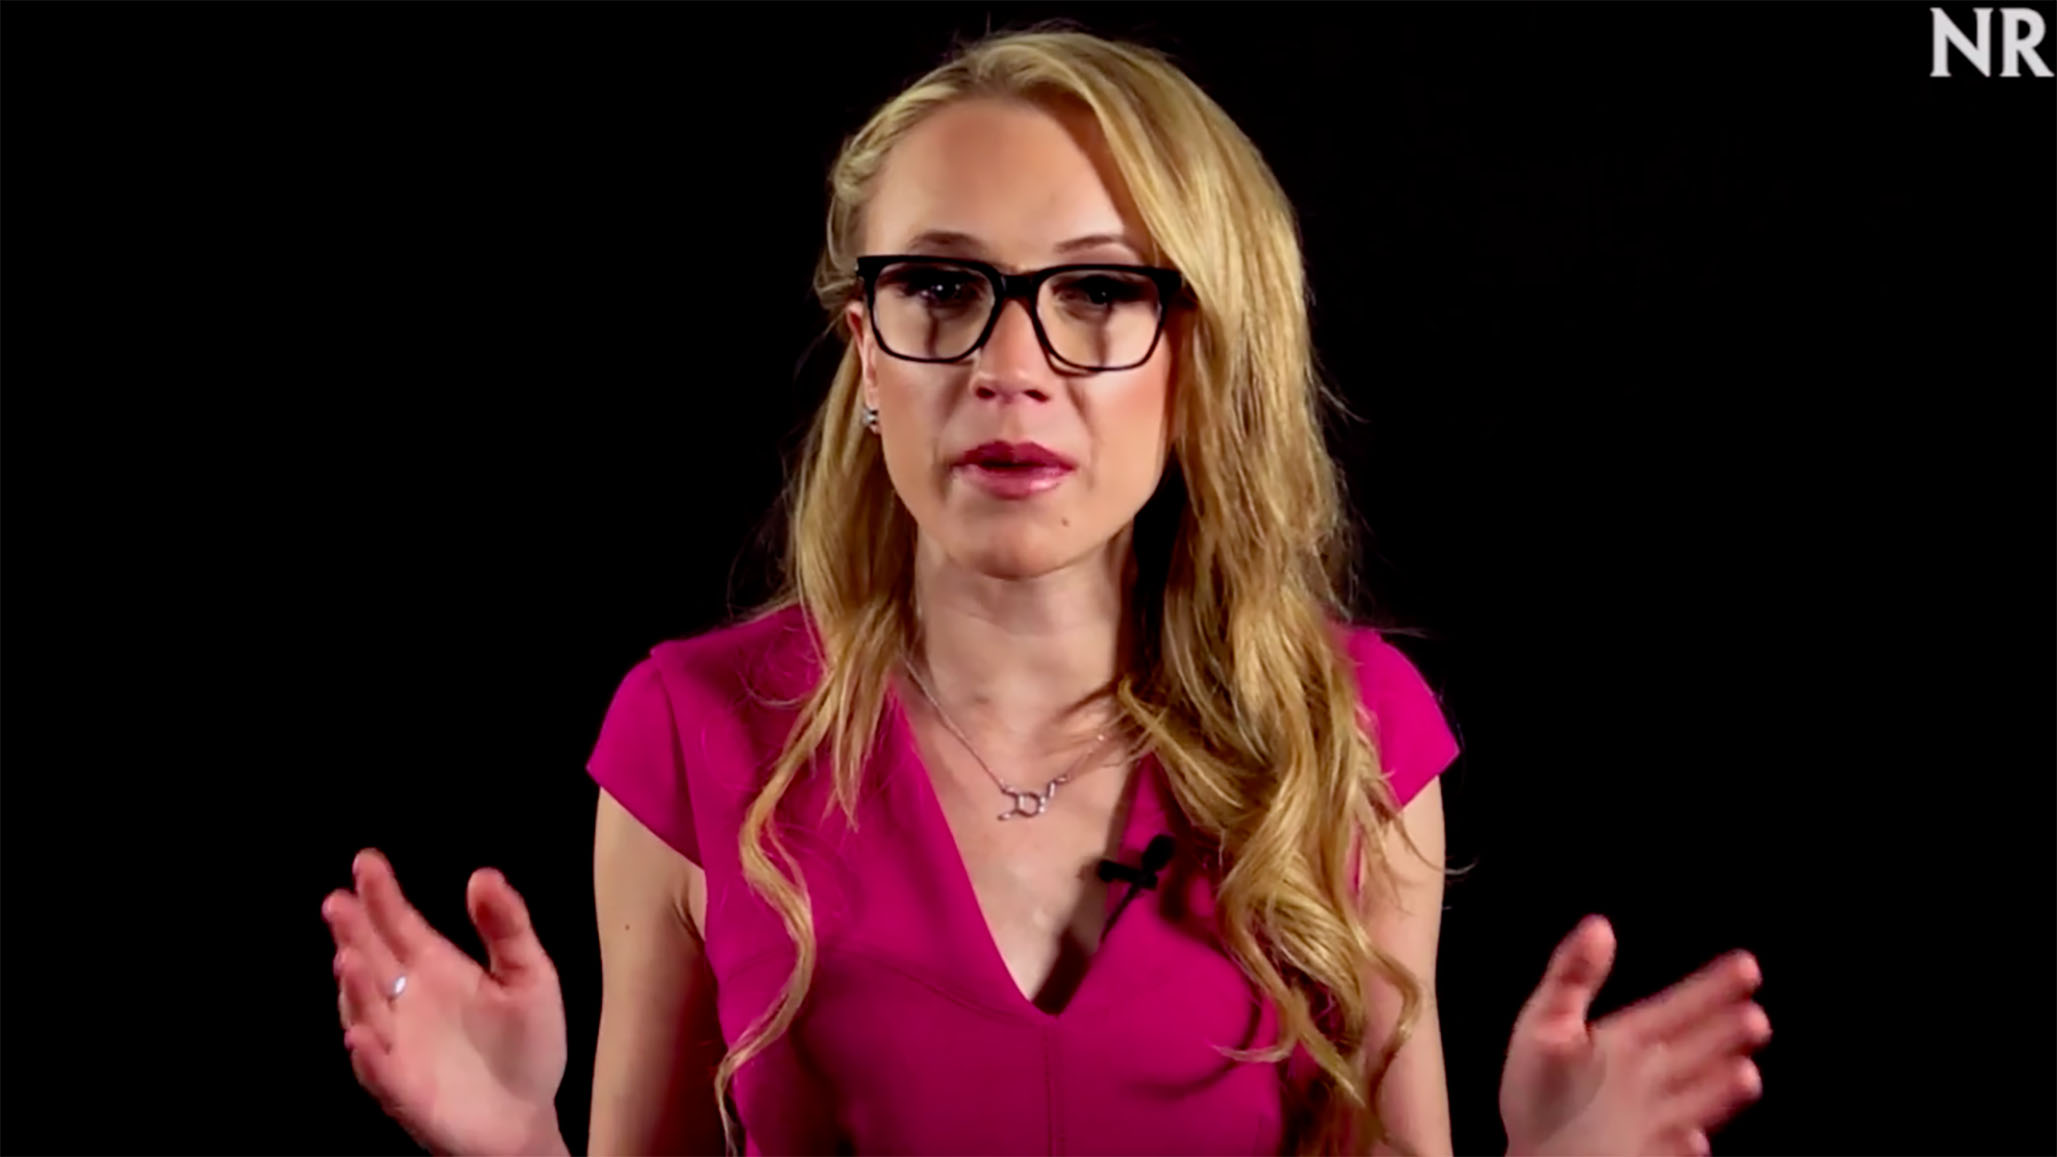 Utah University And Sexism Kat Timpf Discusses Professor Reported For